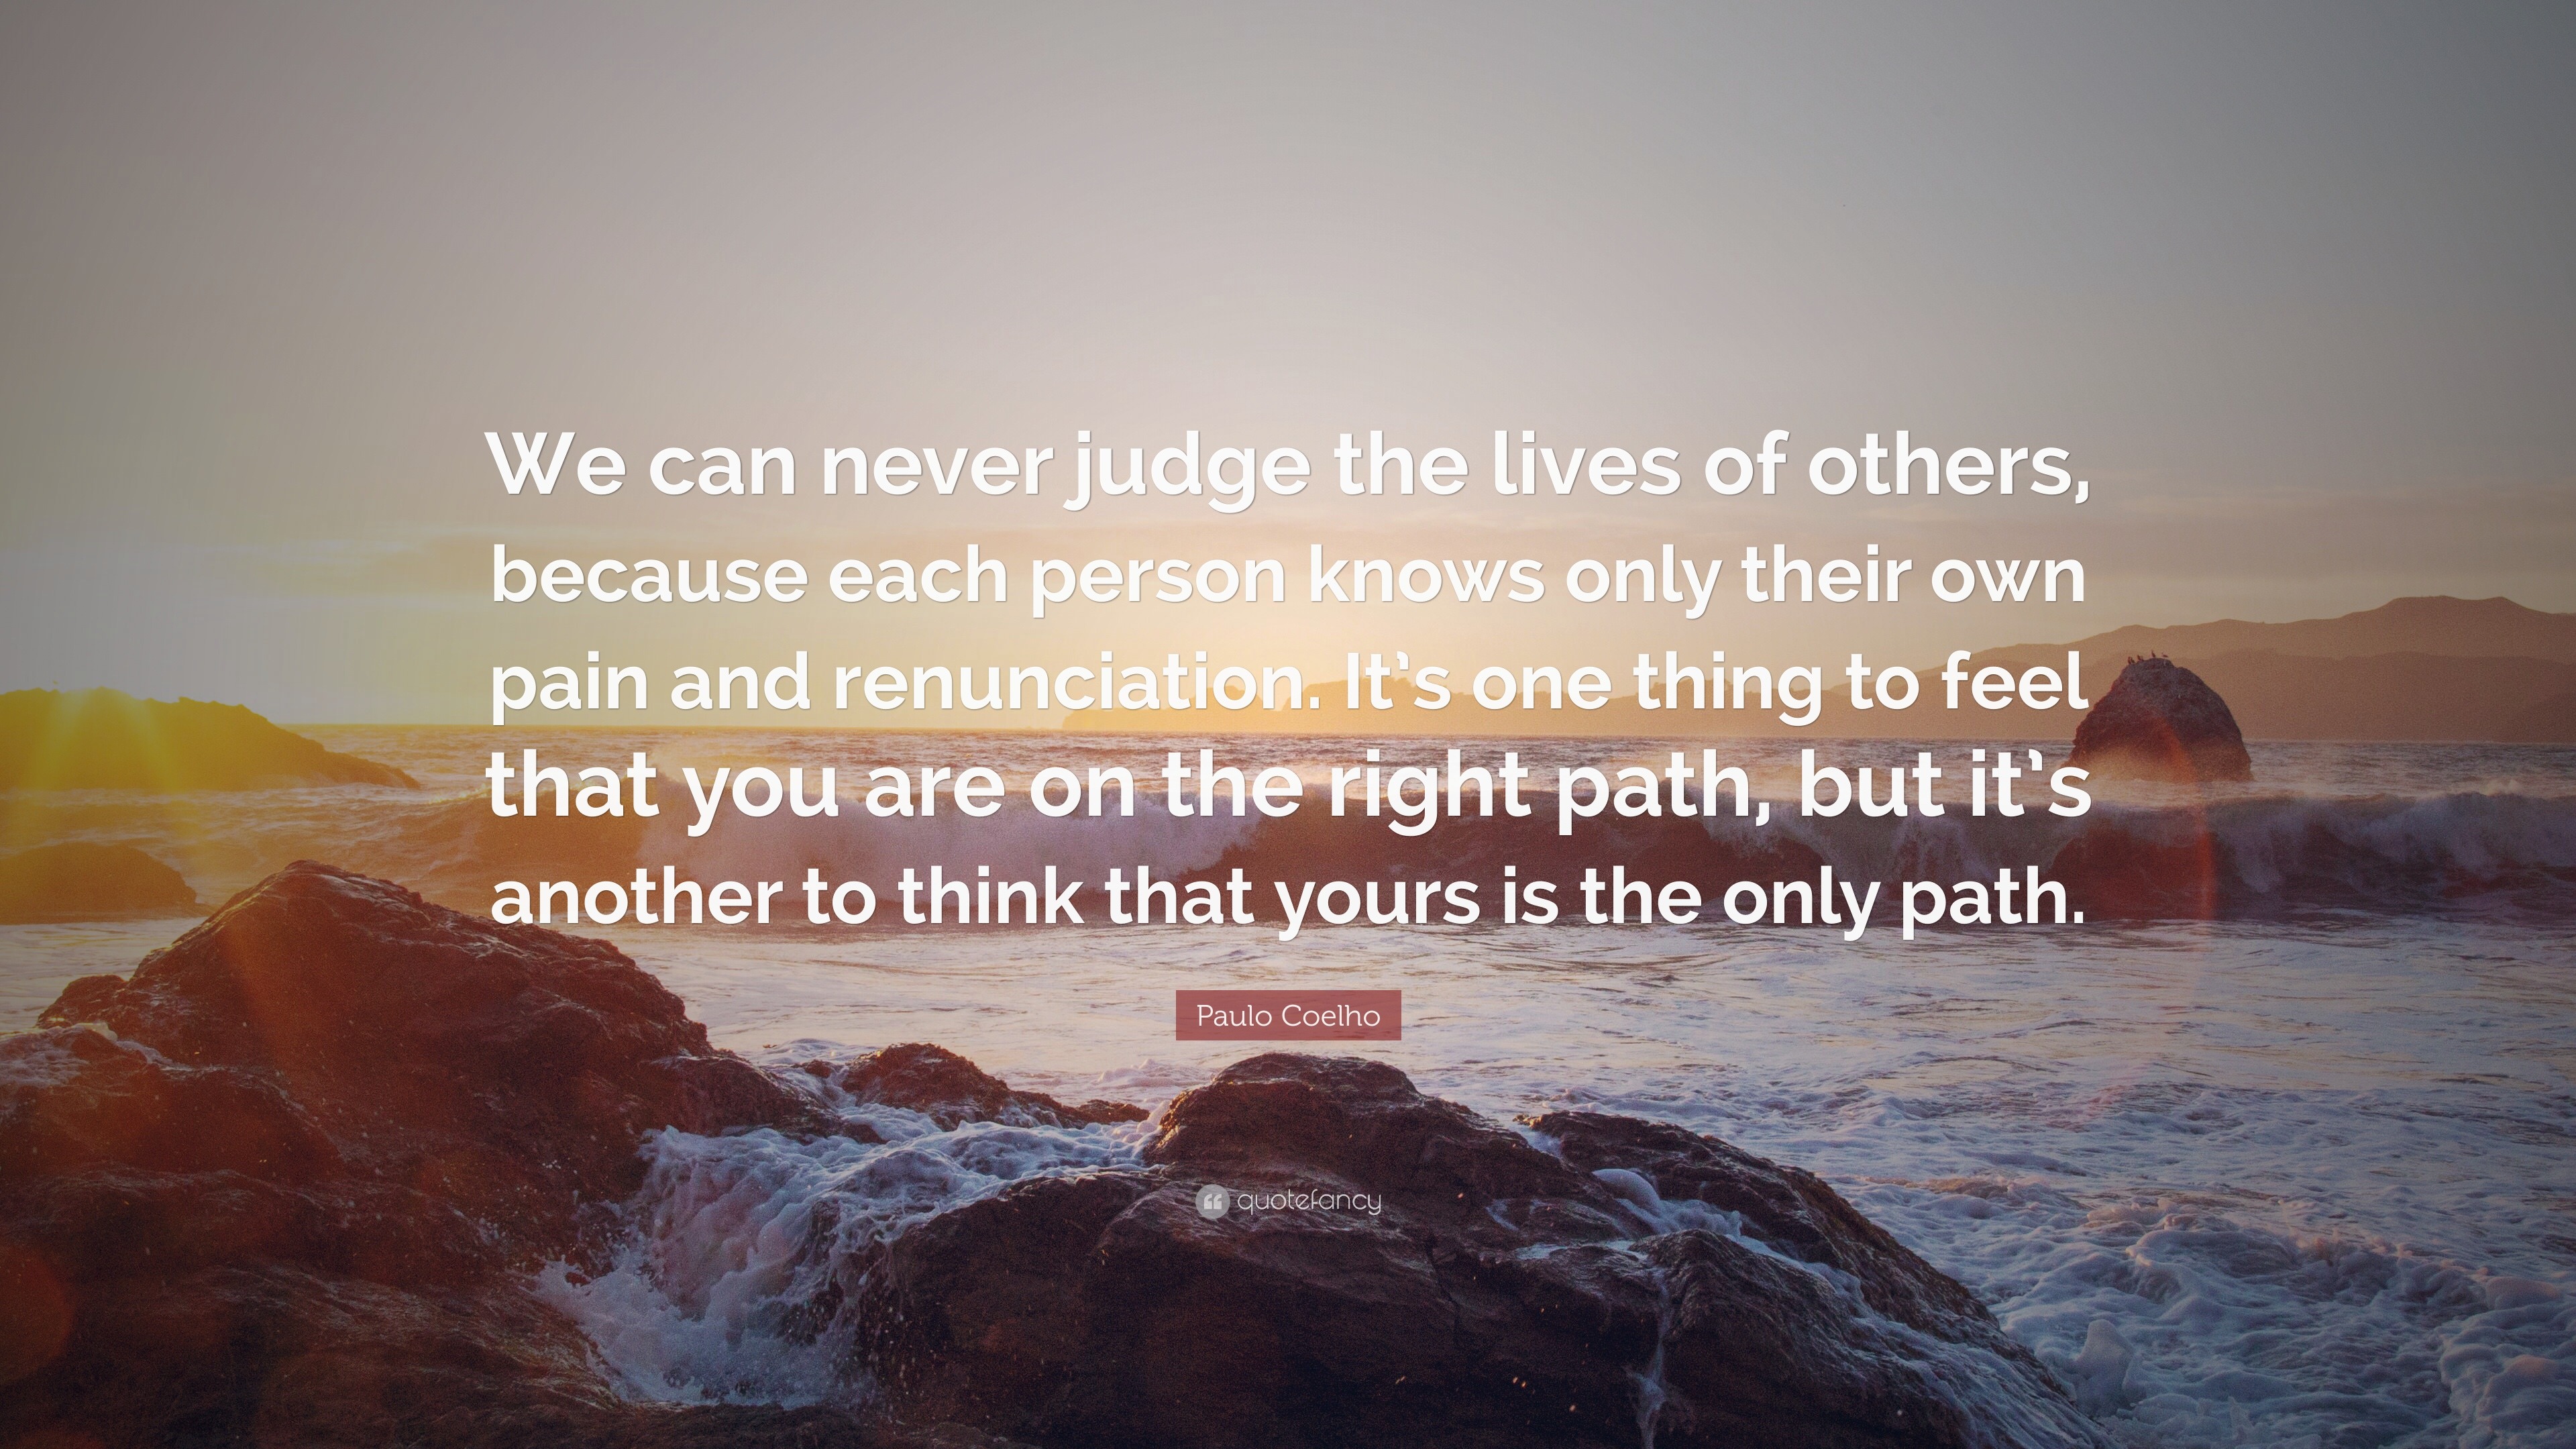 Paulo Coelho Quote: “We can never judge the lives of others